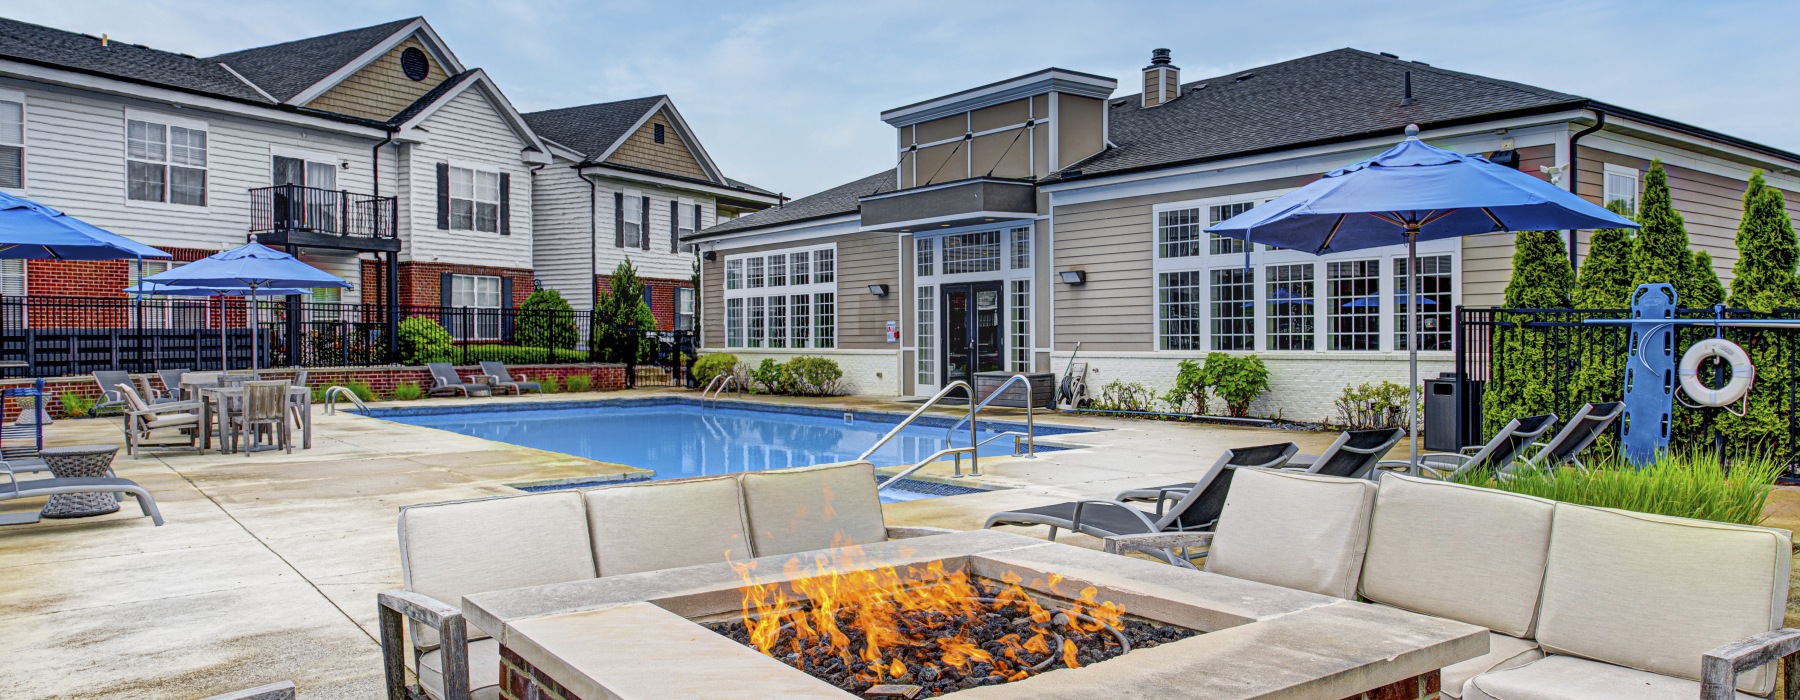 Swimming pool with sundeck and firepit